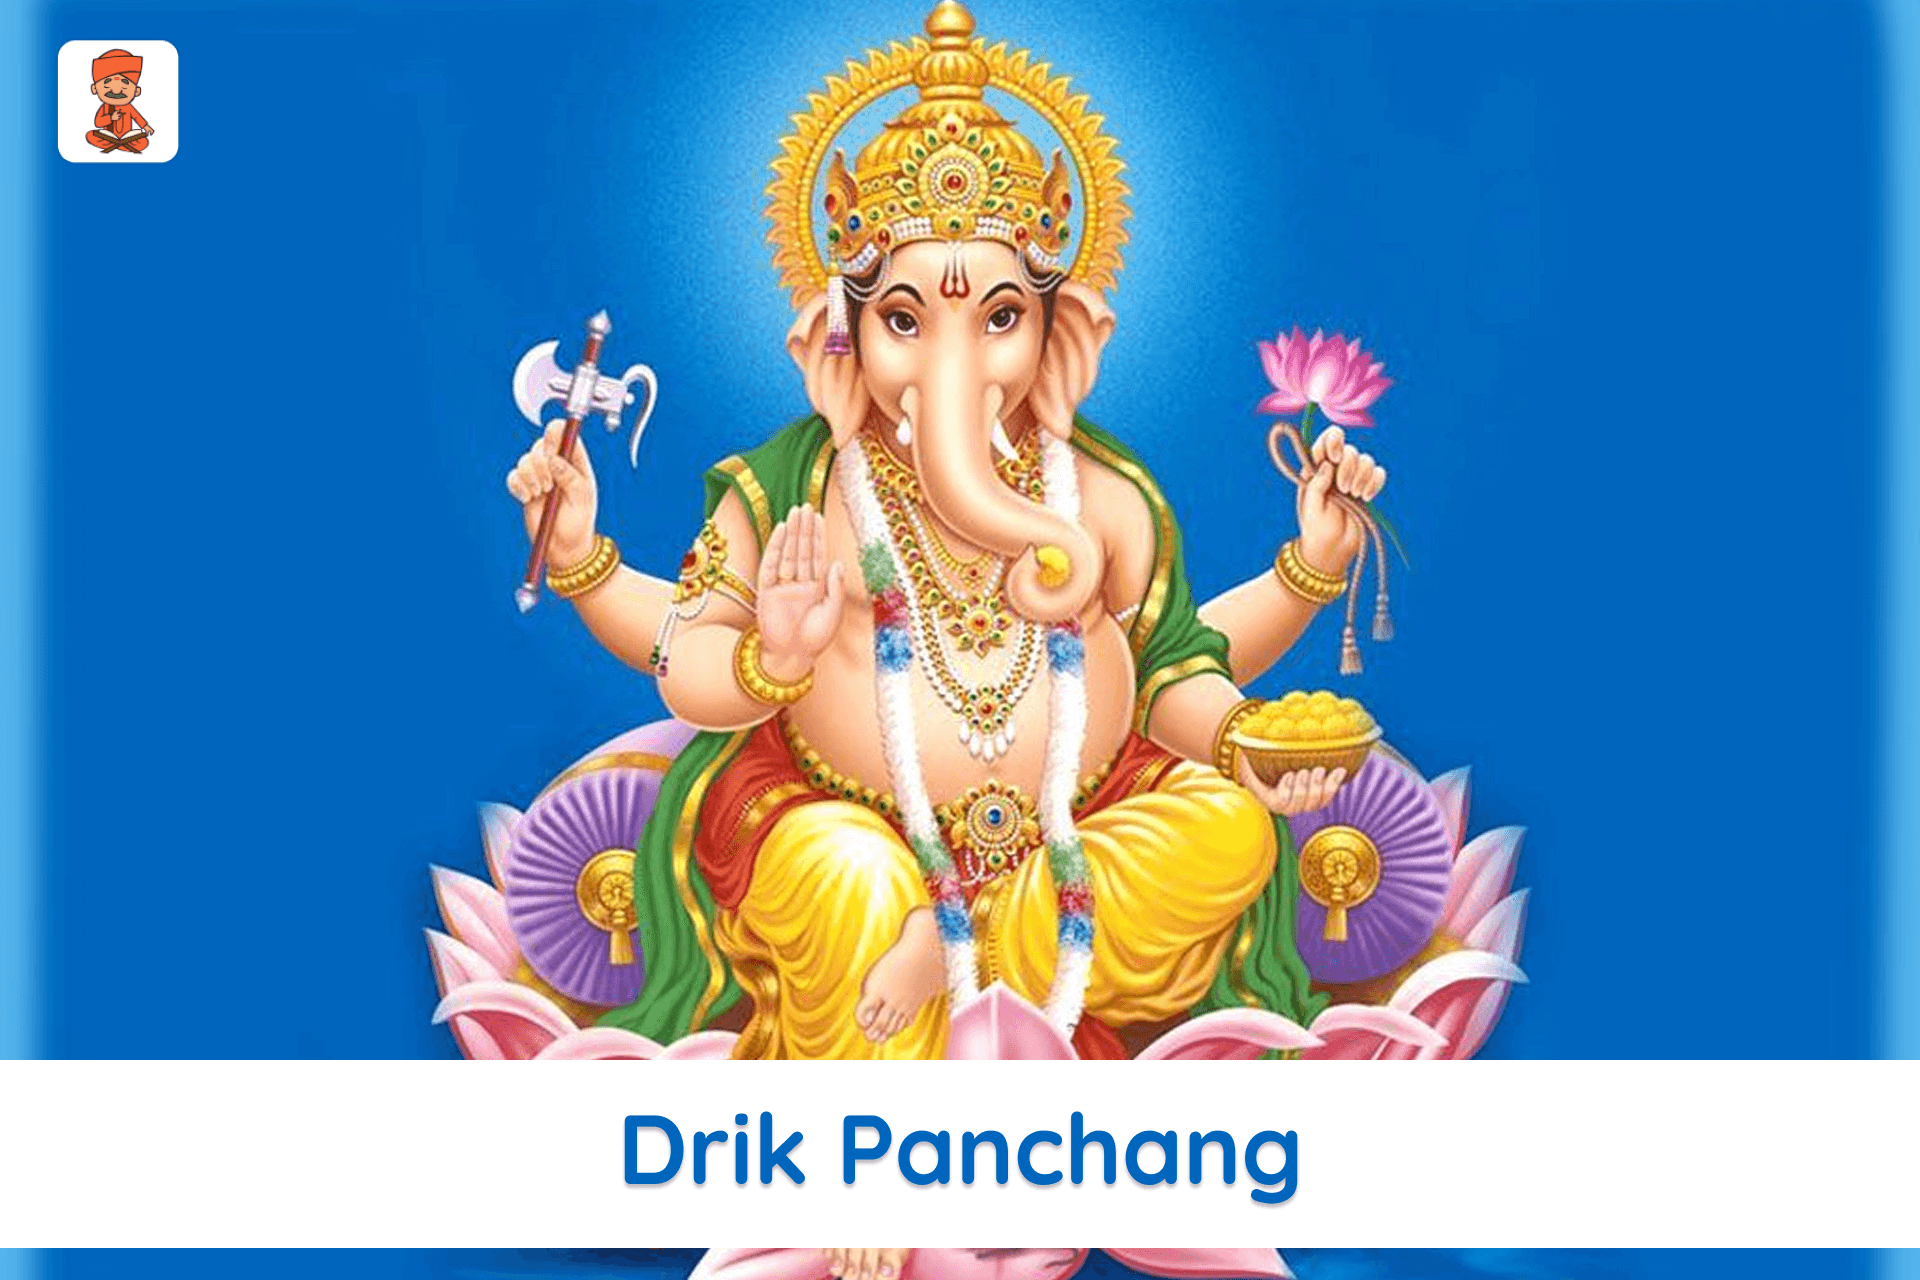 Drik Panchang Will provide You Track Of All Important Hindu Rituals